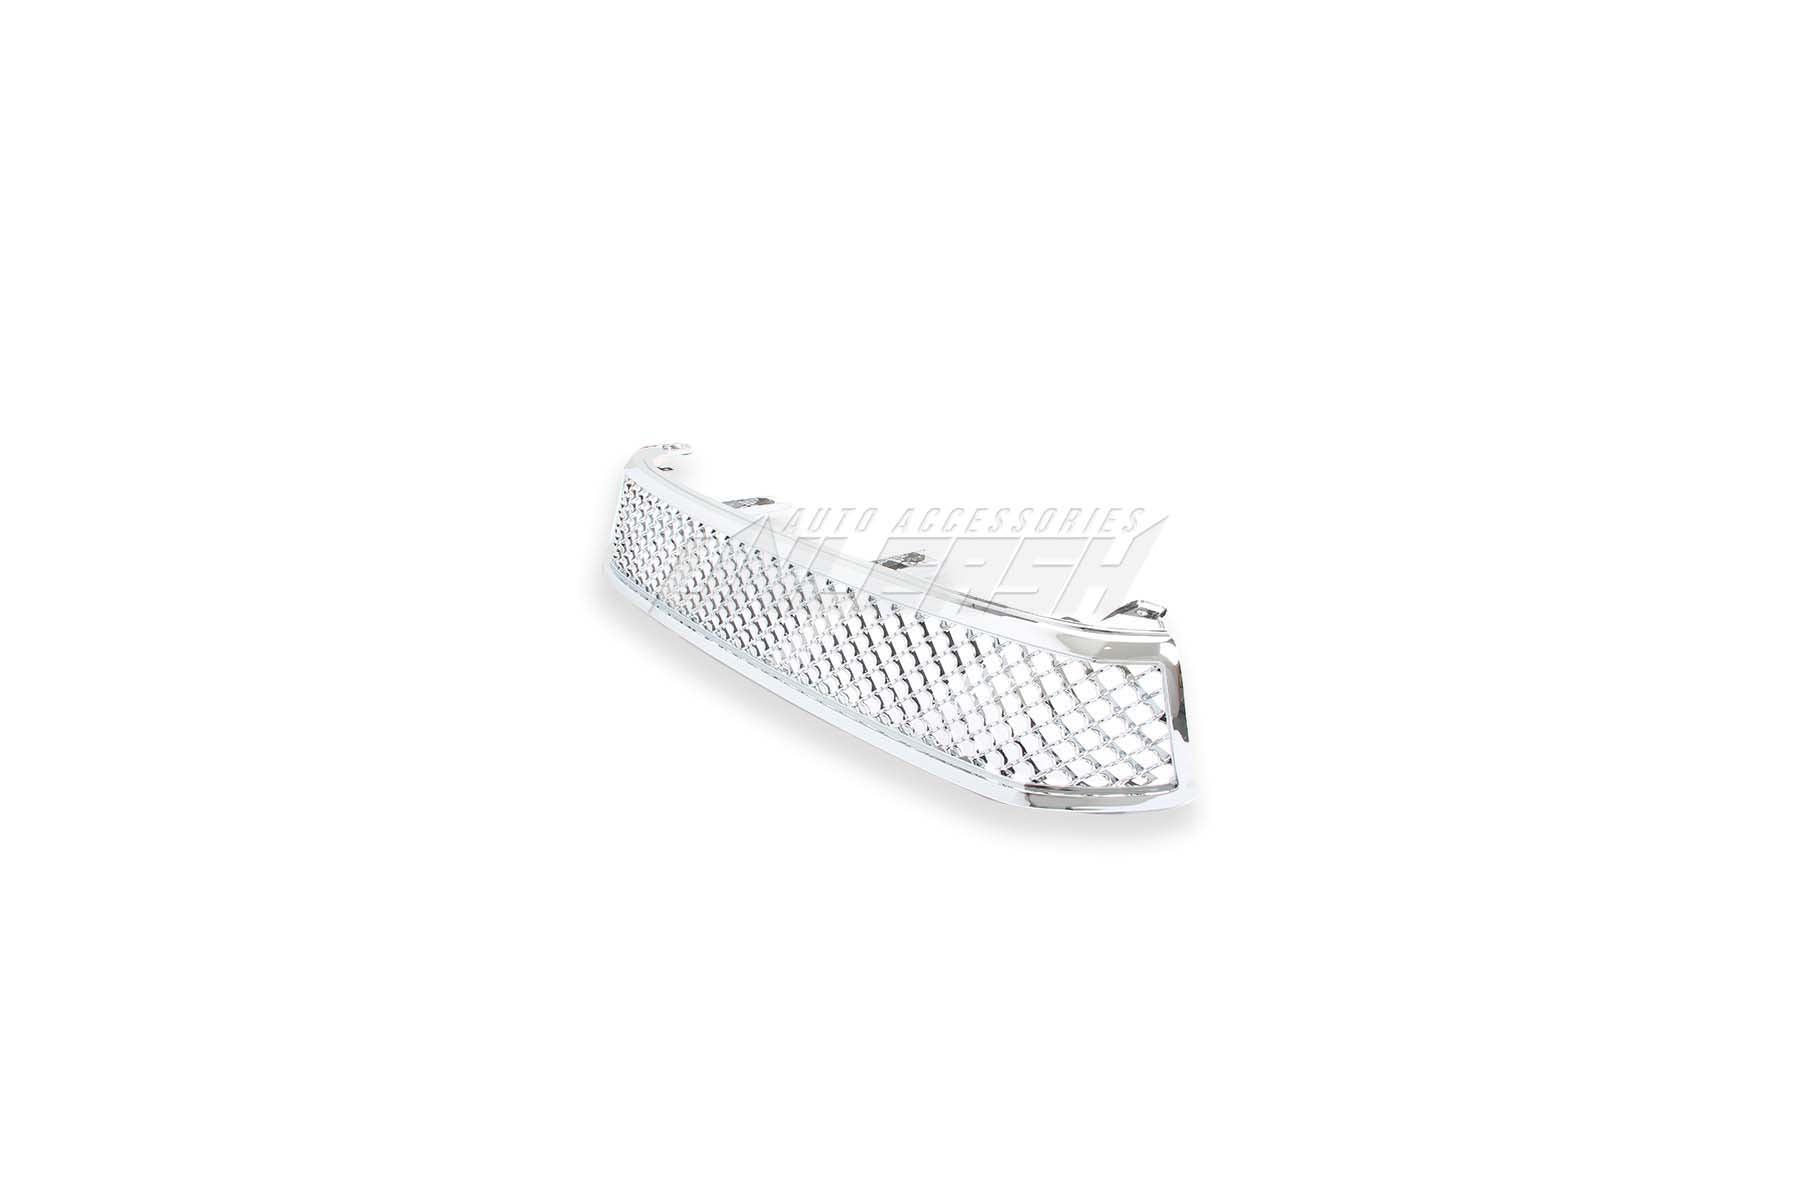 Grille for Toyota Hilux 2015-2018 Model Chrome Style A - Prolink Performance